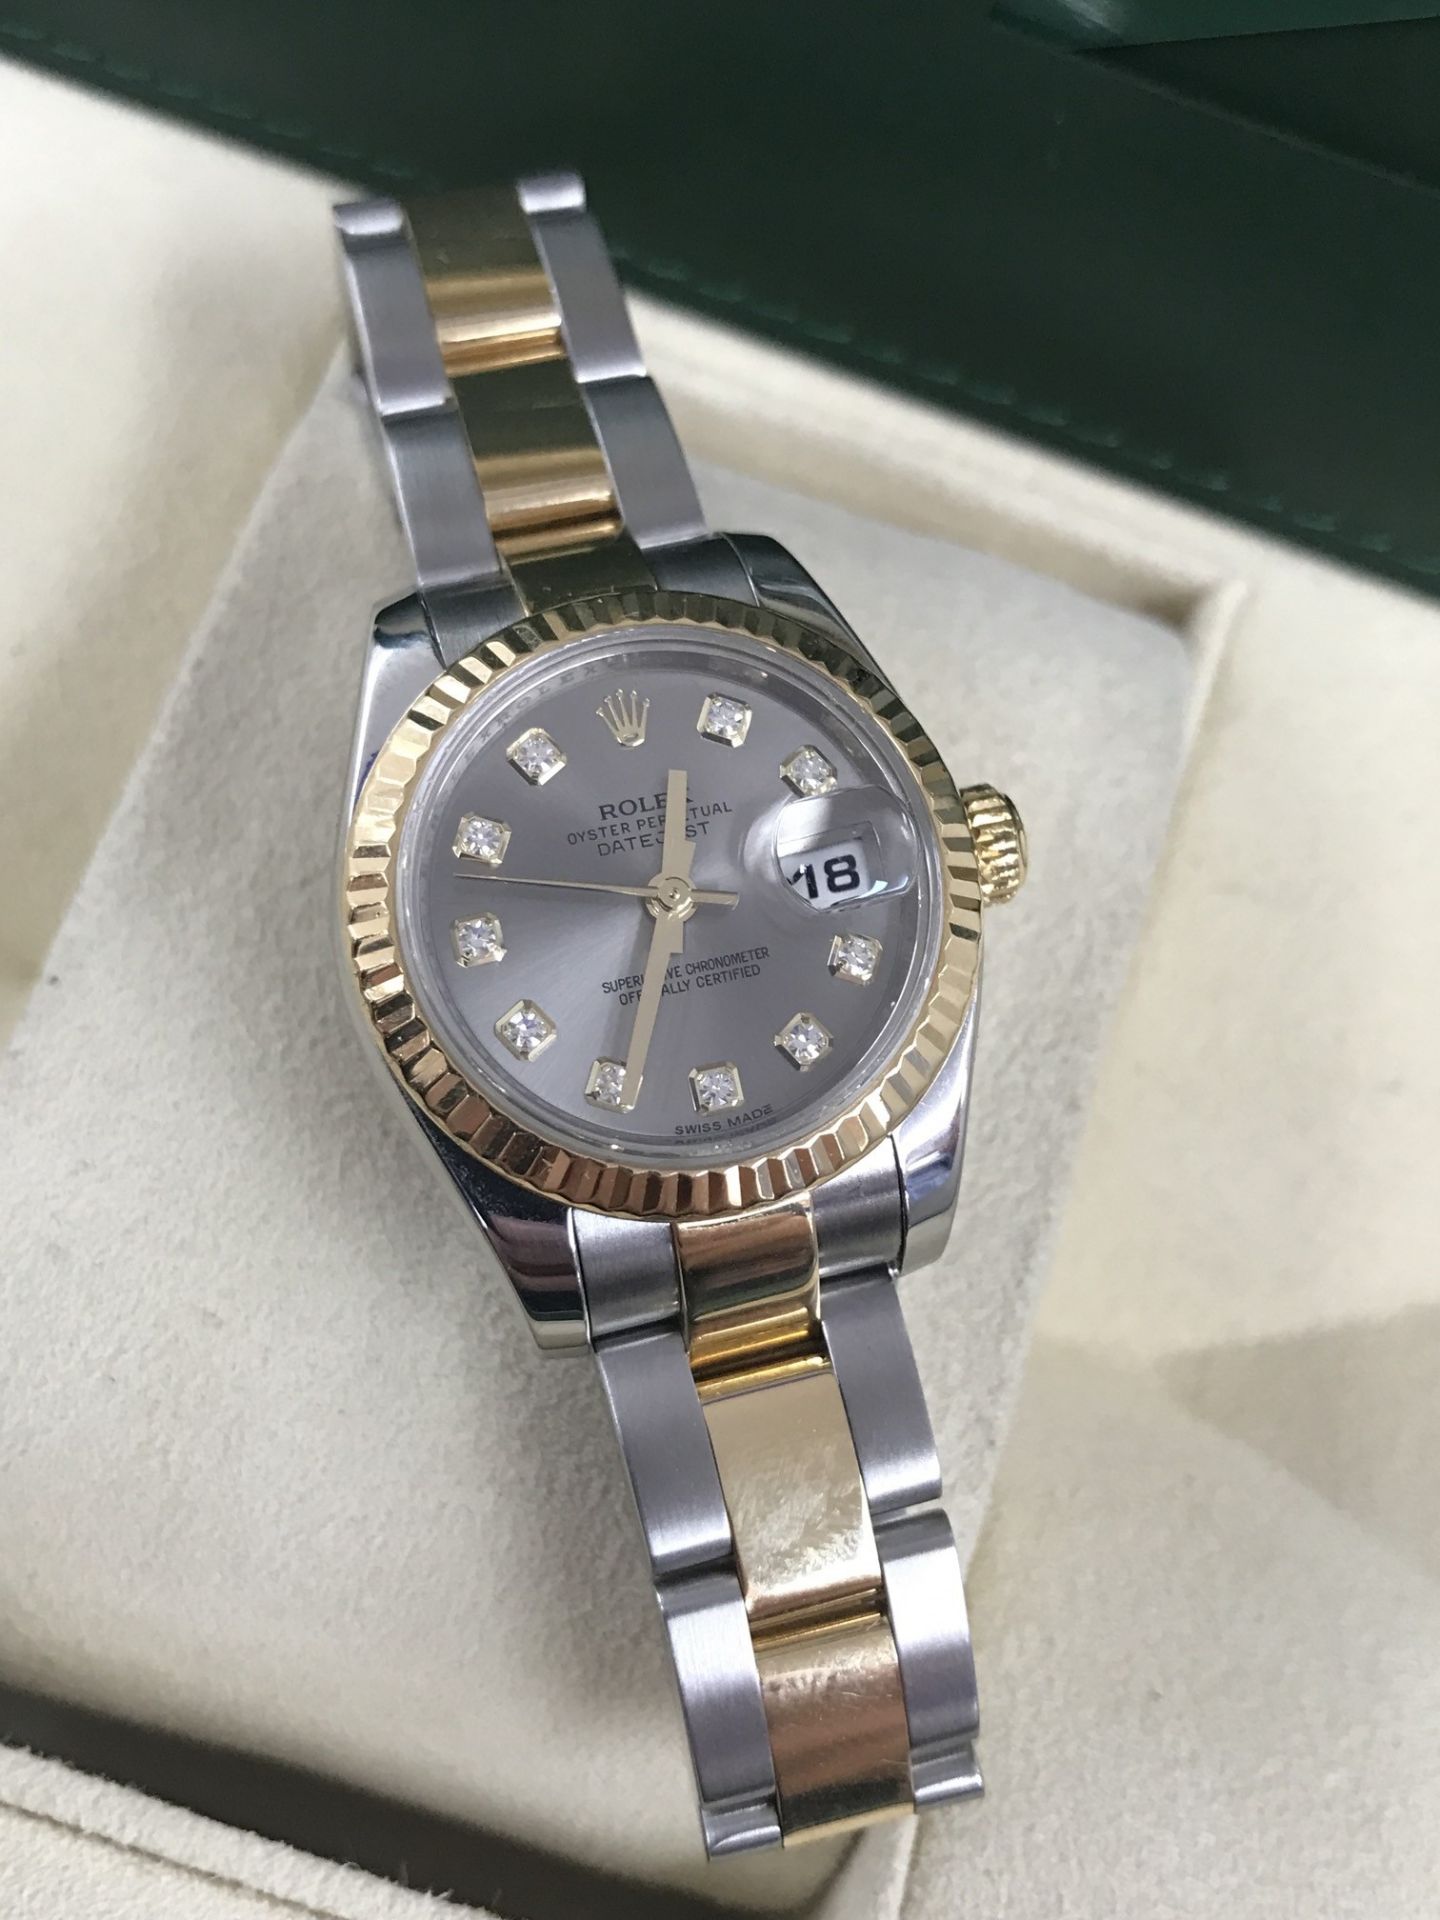 LADIES STEEL & GOLD ROLEX DATEJUST SET WITH DIAMONDS WITH BOX & PAPERS - Image 6 of 10